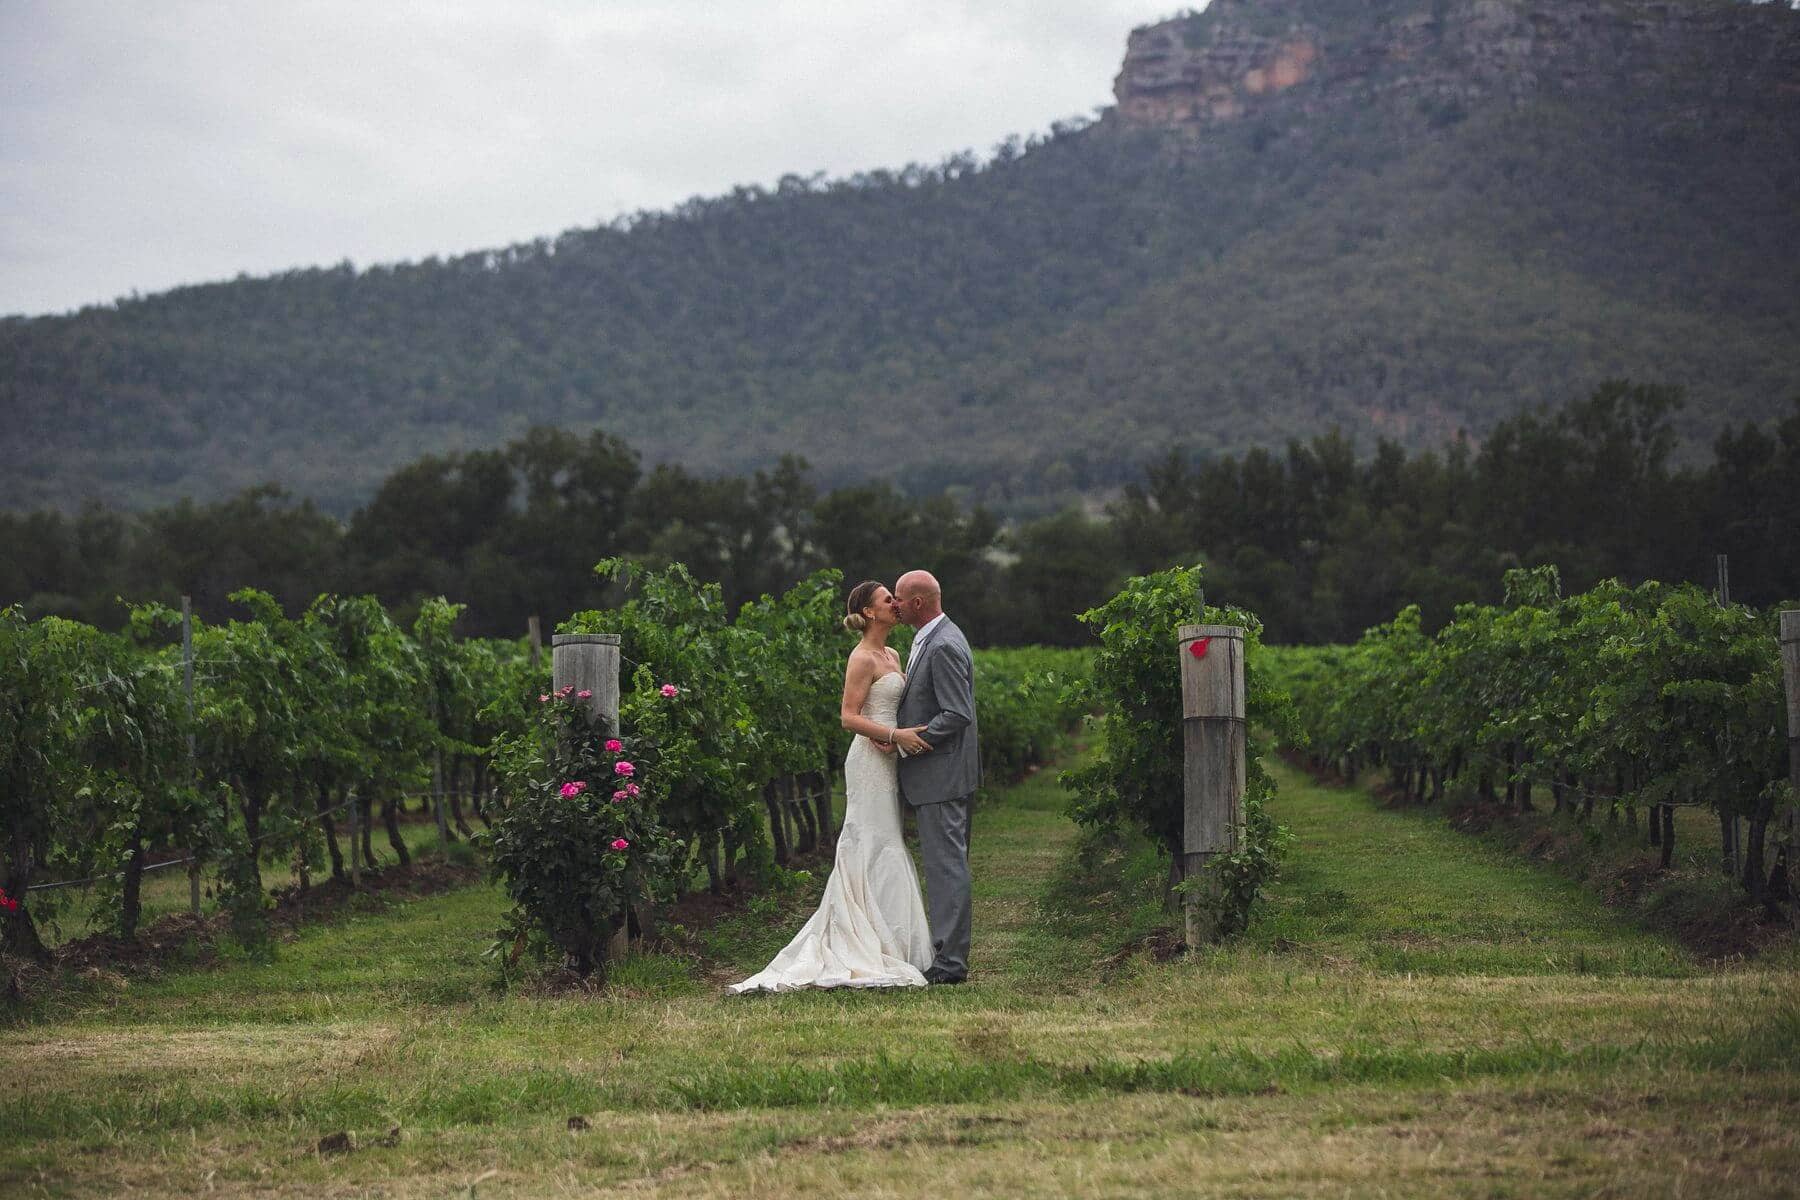 best-rustic-country-wedding-venues-australia-Margan-Wines-and-Restaurant-NSW-photo-April-Werz-Photography